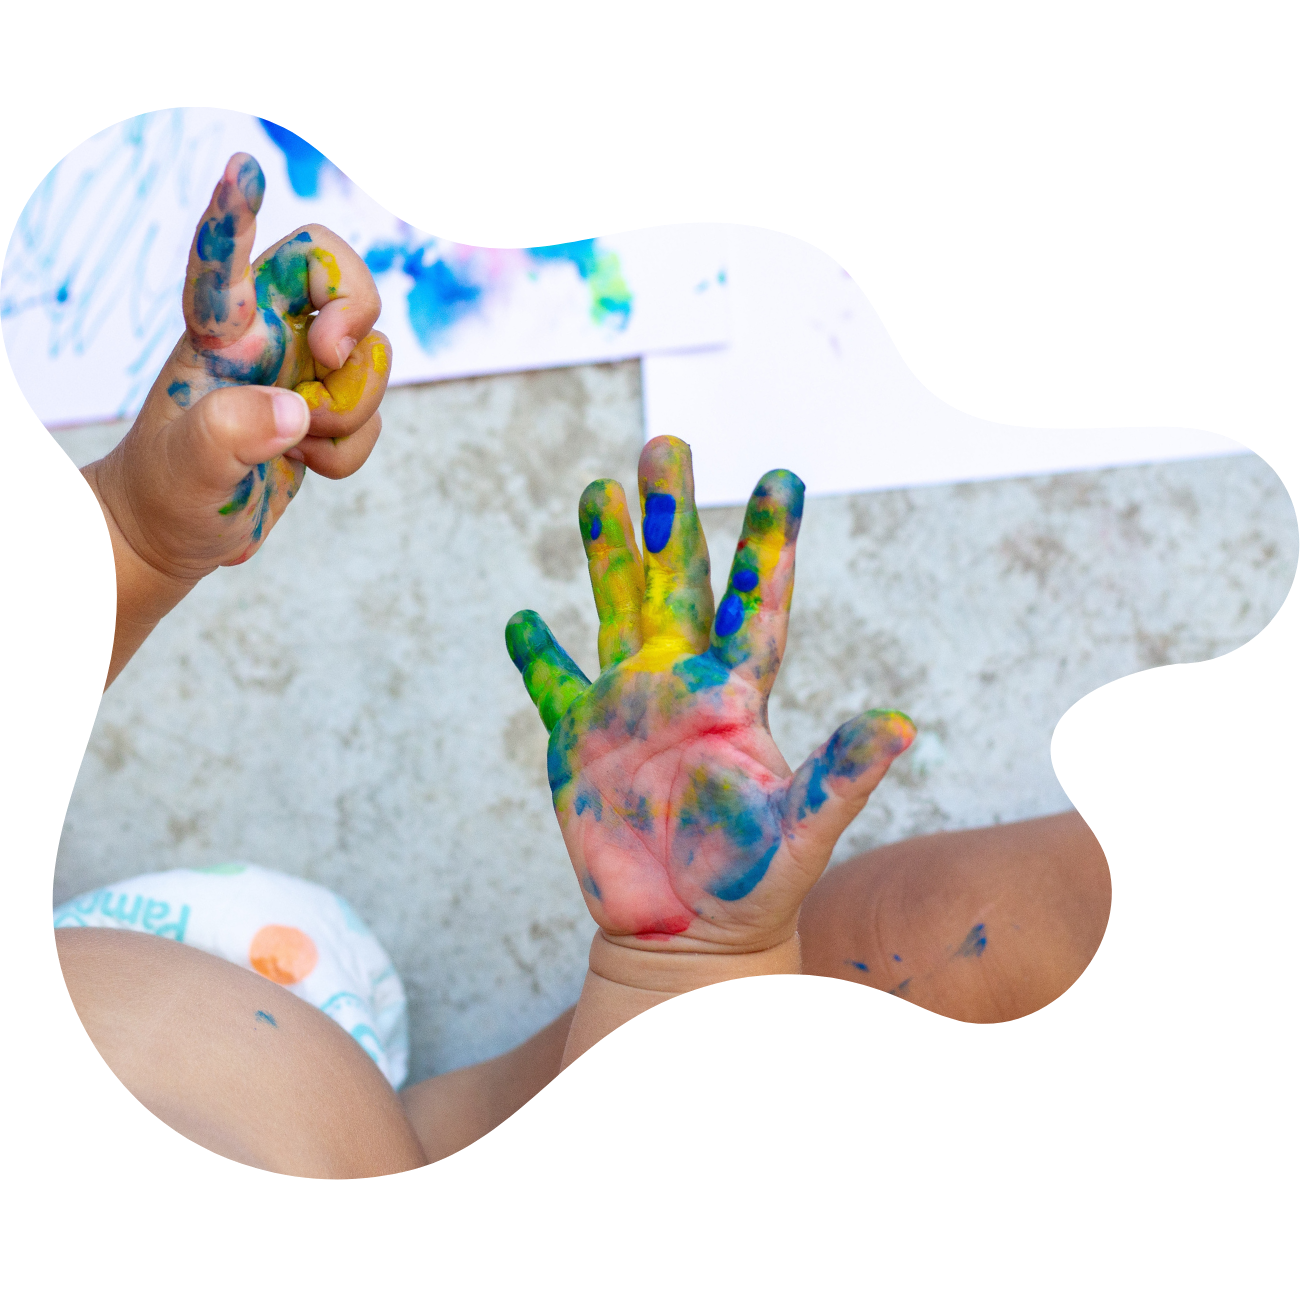 Image of a child with paint covered hands